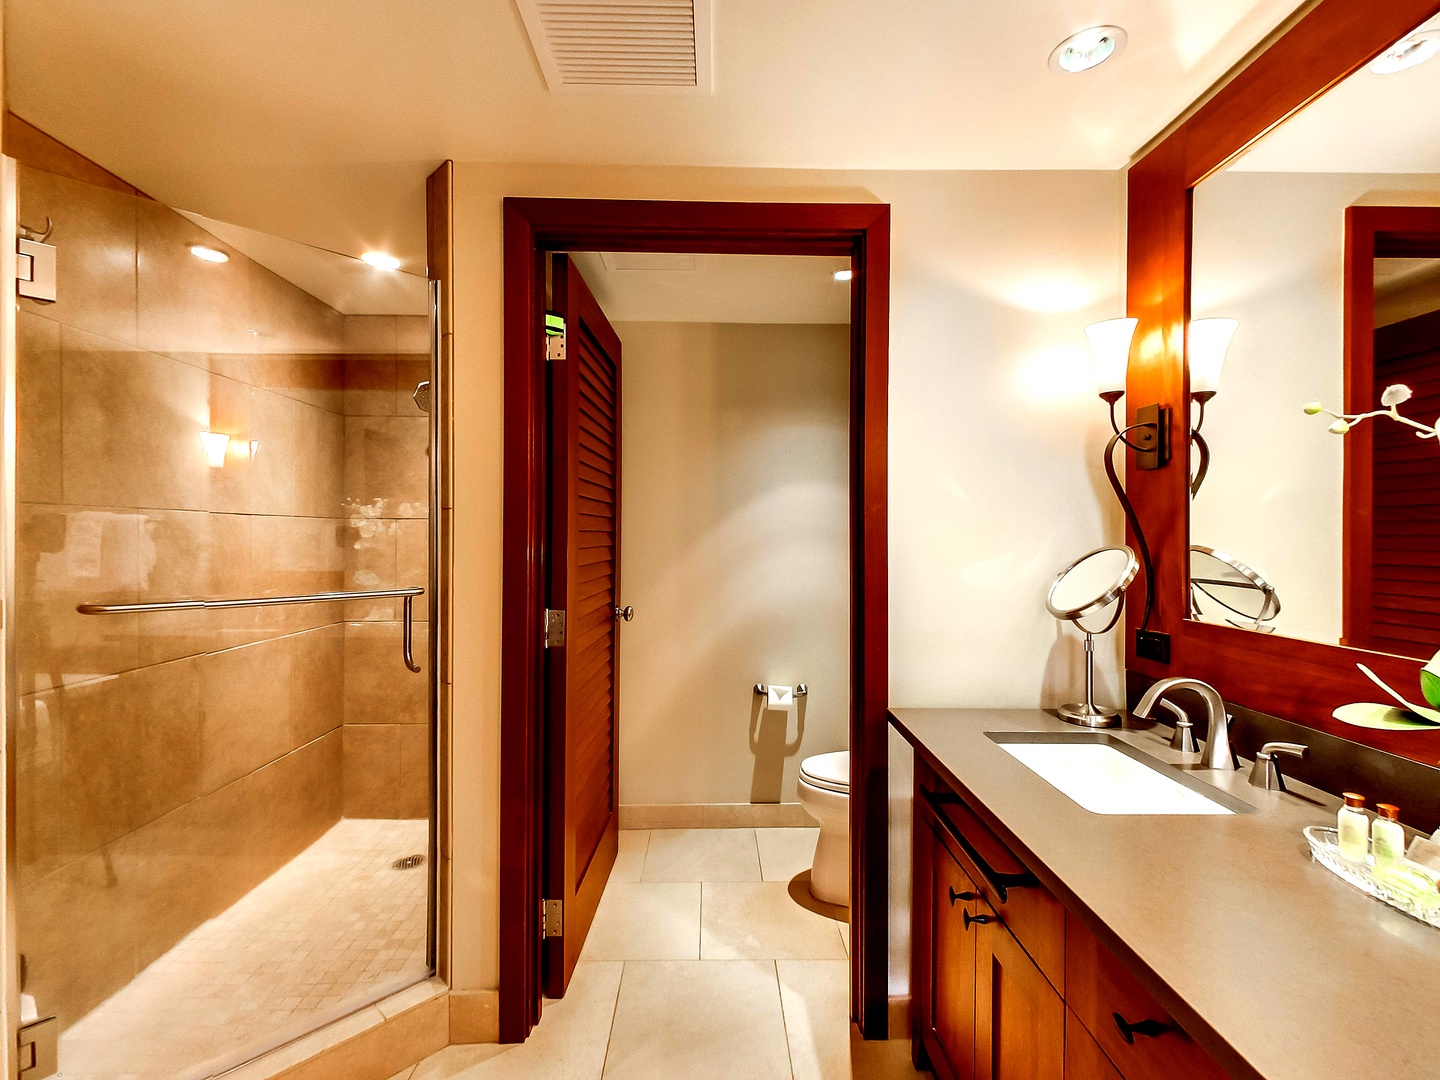 Kapolei Vacation Rentals, Ko Olina Beach Villas B107 - The primary guest bathroom with a walk-in shower.